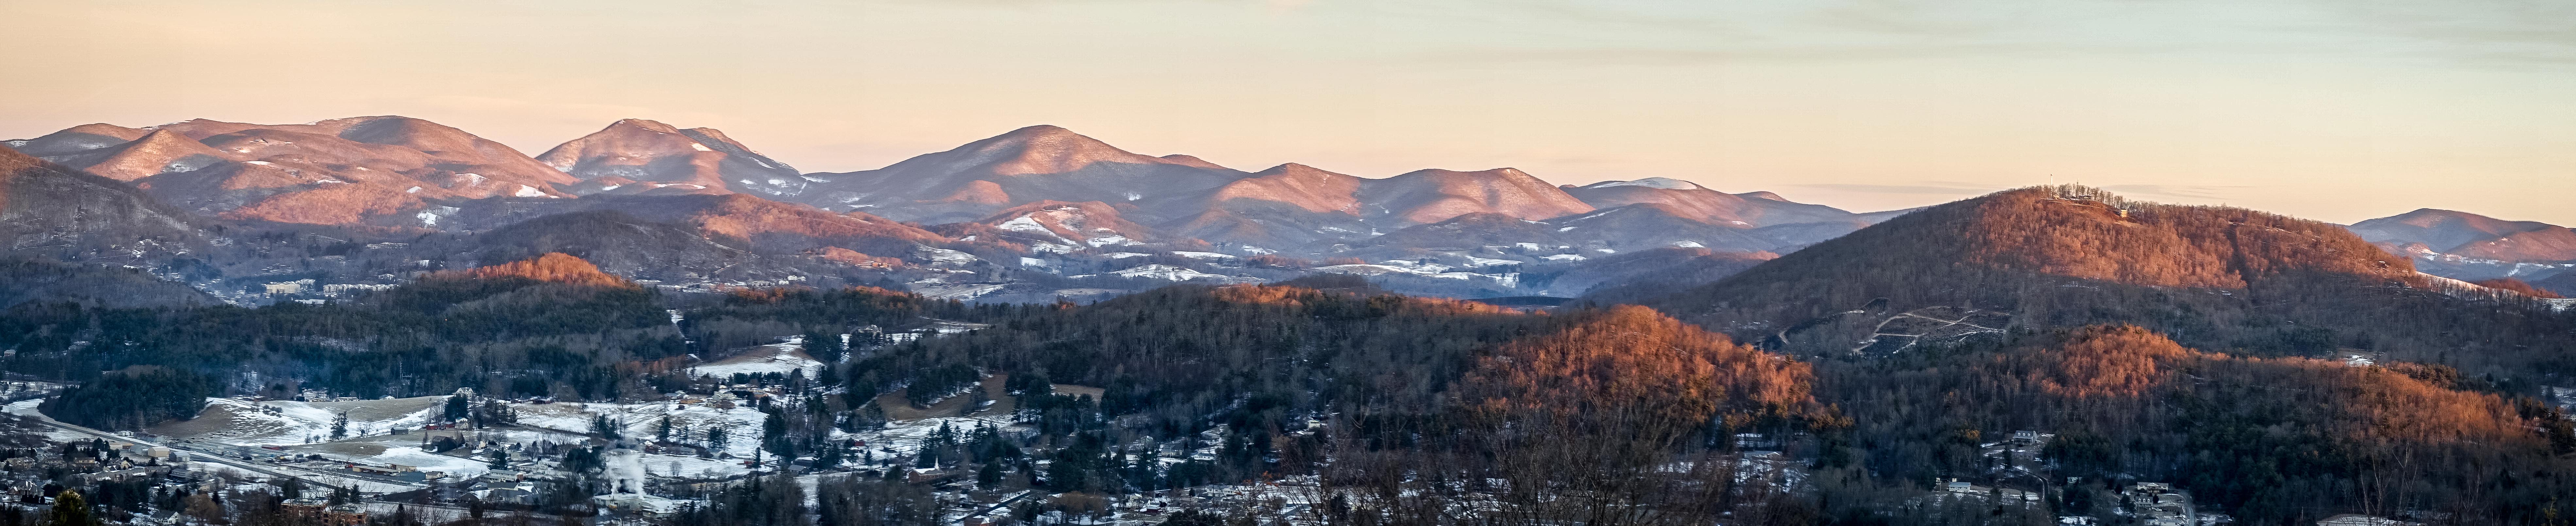 I woke up at 04:30 to see the Super Blood Blue Moon thing, but all I got was this panorama of Boone.